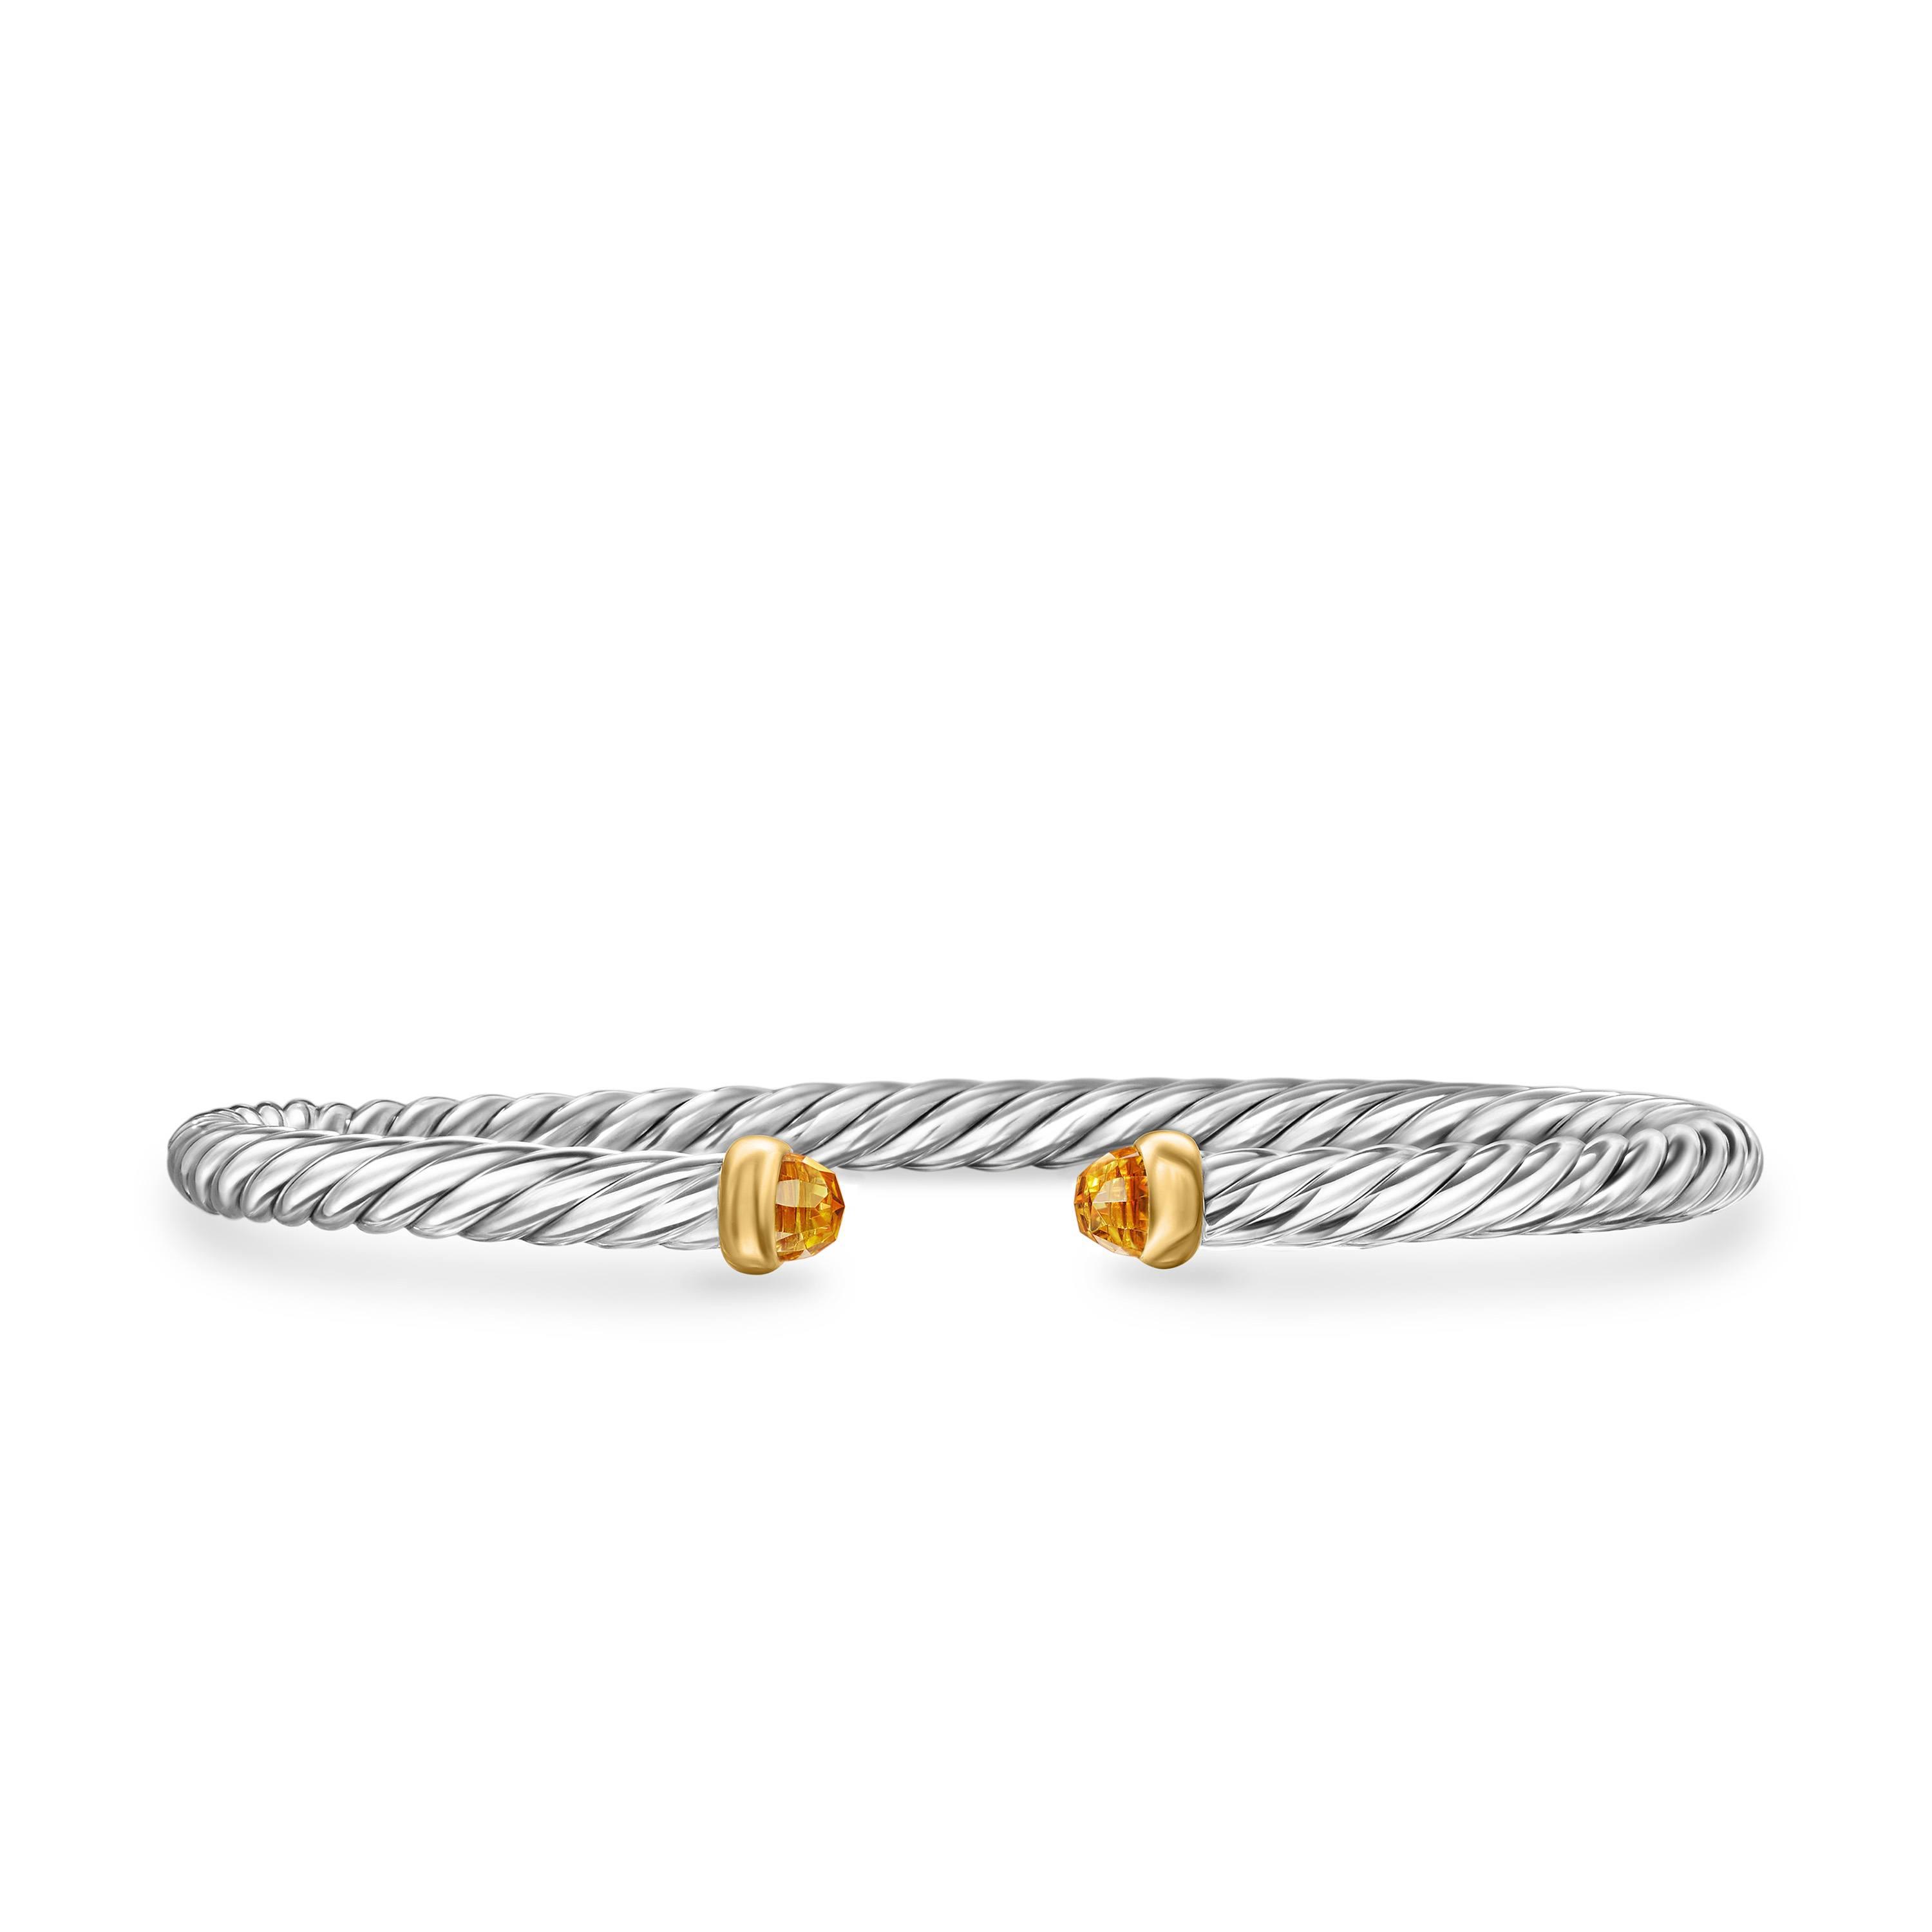 David Yurman Cable Flex Sterling Silver Bracelet with Citrine, Size Small 0